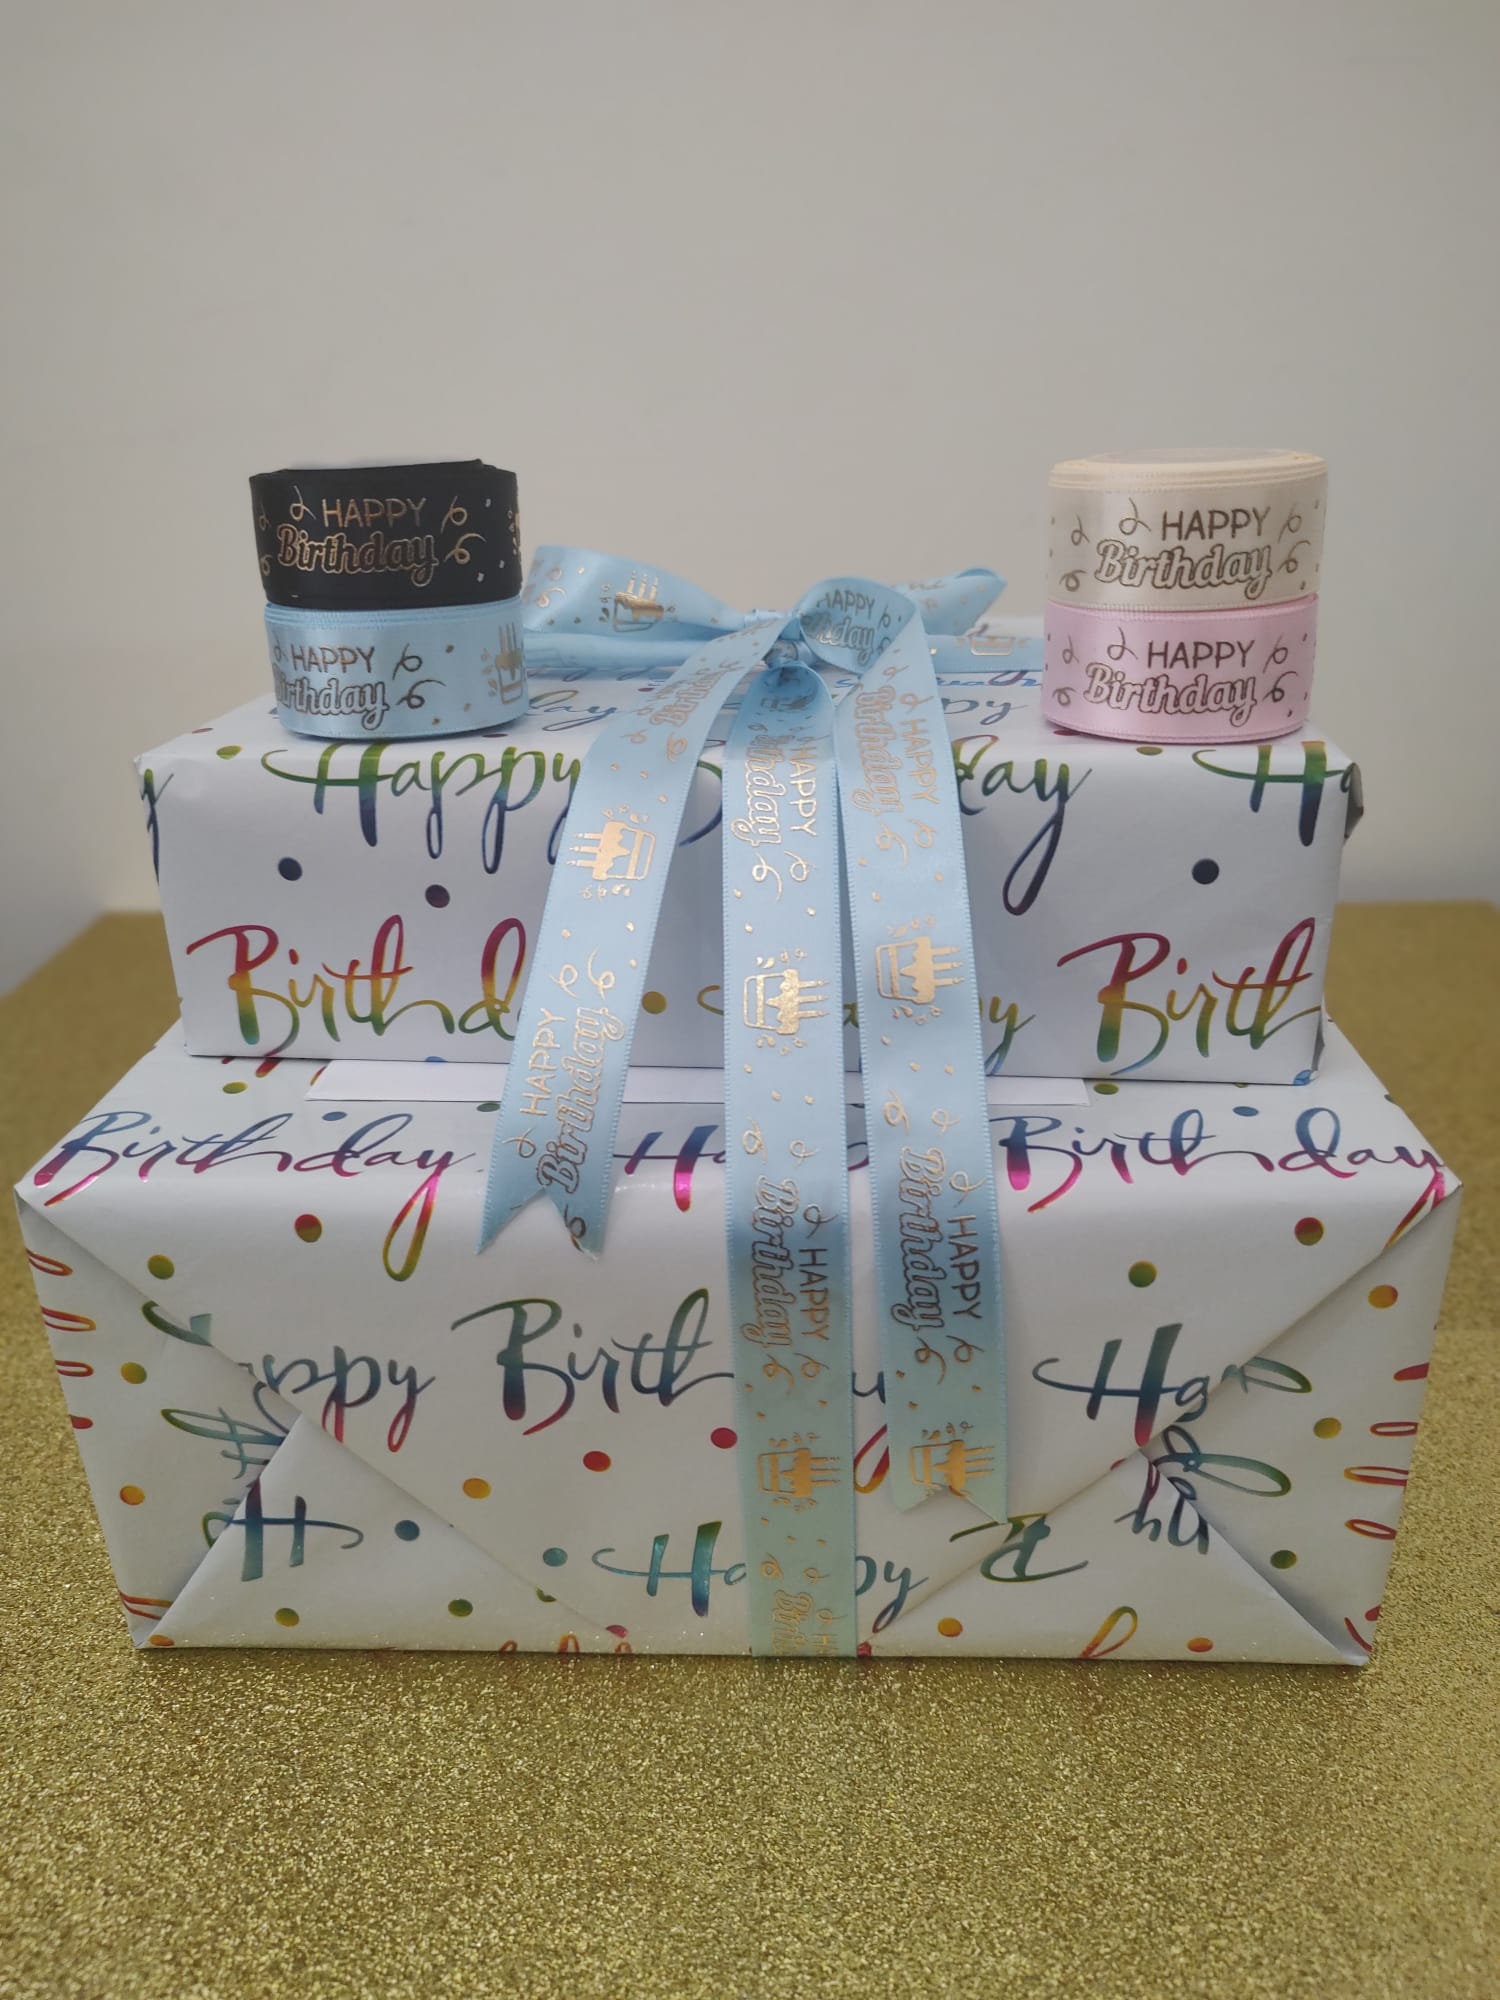 Happy Birthday Ribbon Printed in Variegated Colours on White Satin